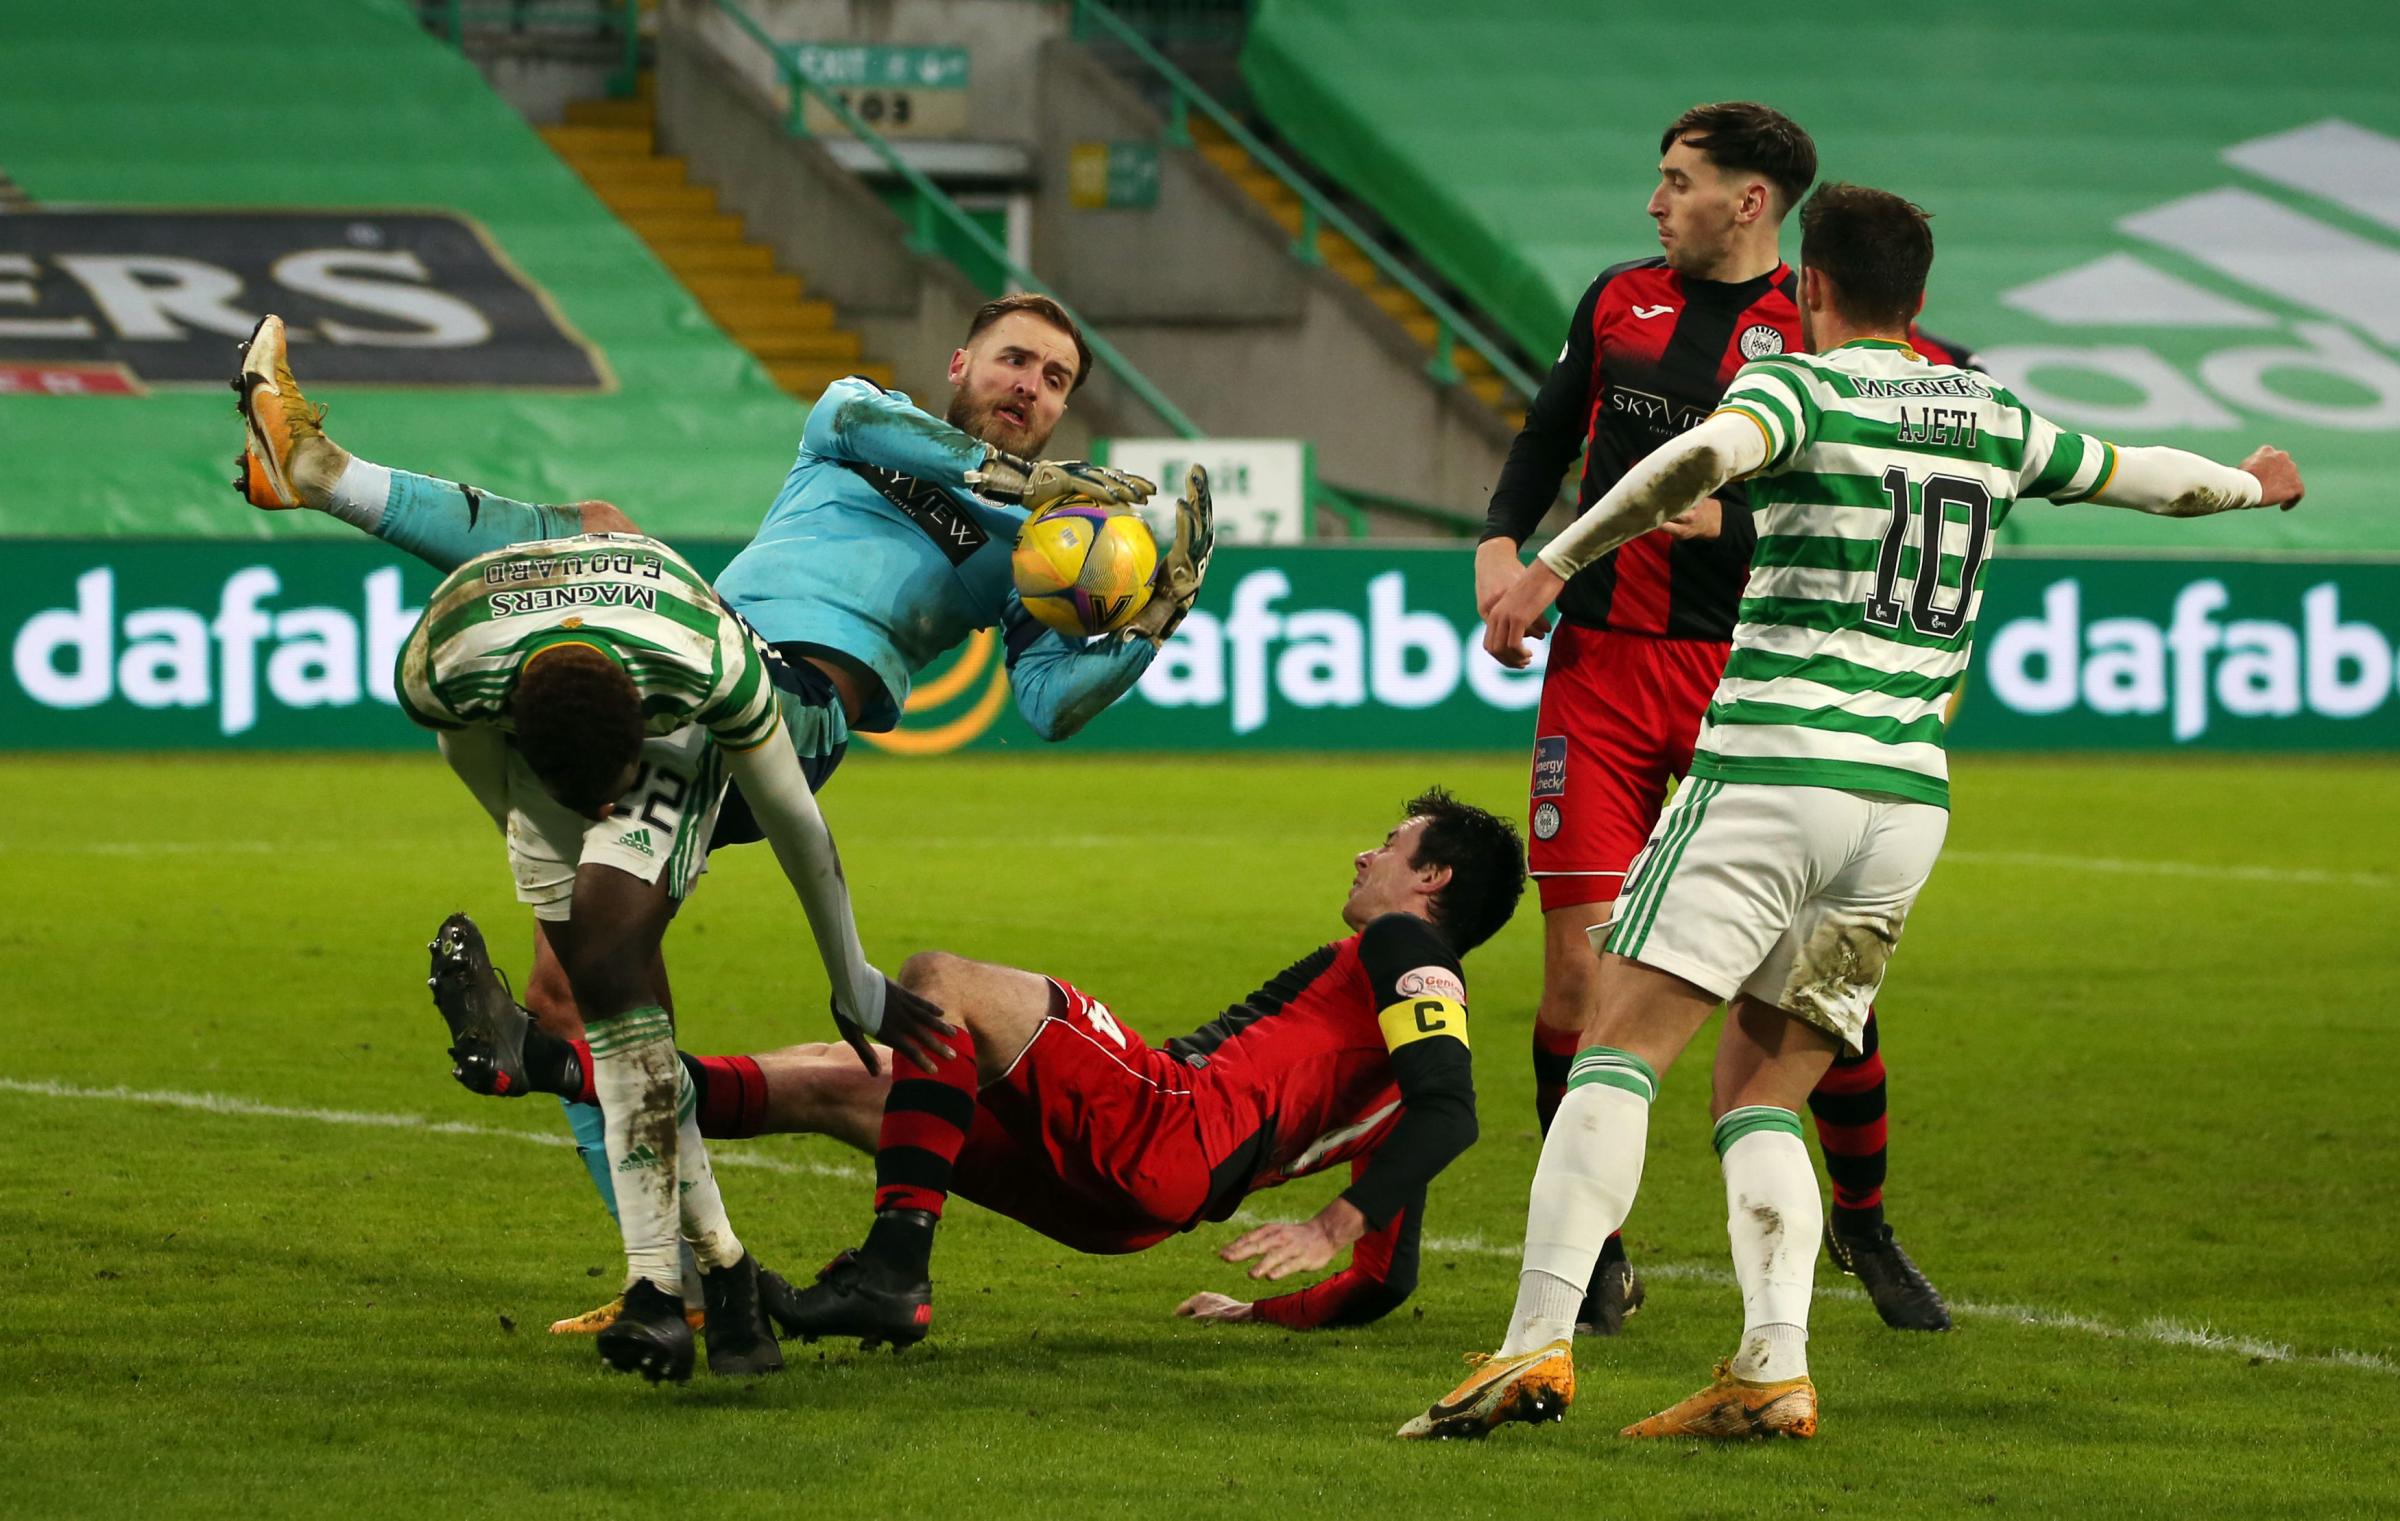 St Mirrens Jak Alnwick makes a save during the Scottish Premiership match at Celtic Park, Glasgow. Picture date: Saturday January 30, 2021. PA Photo. See PA story SOCCER Celtic. Photo credit should read: Andrew Milligan/PA Wire. RESTRICTIONS: Use subjec